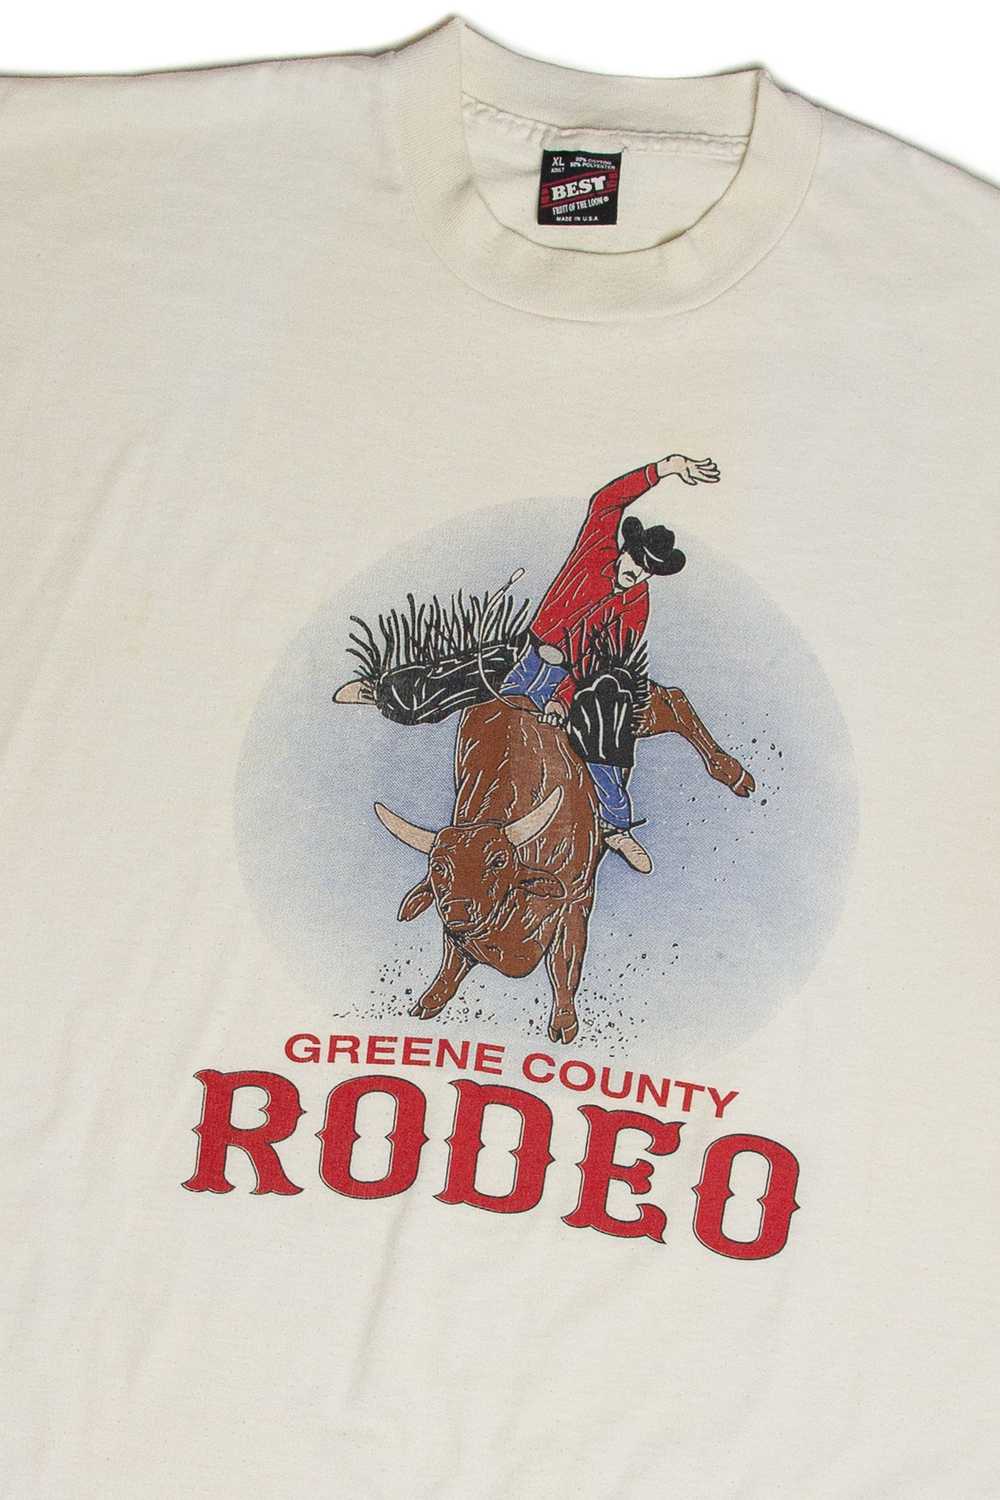 Vintage Greene County Rodeo T-Shirt - image 2